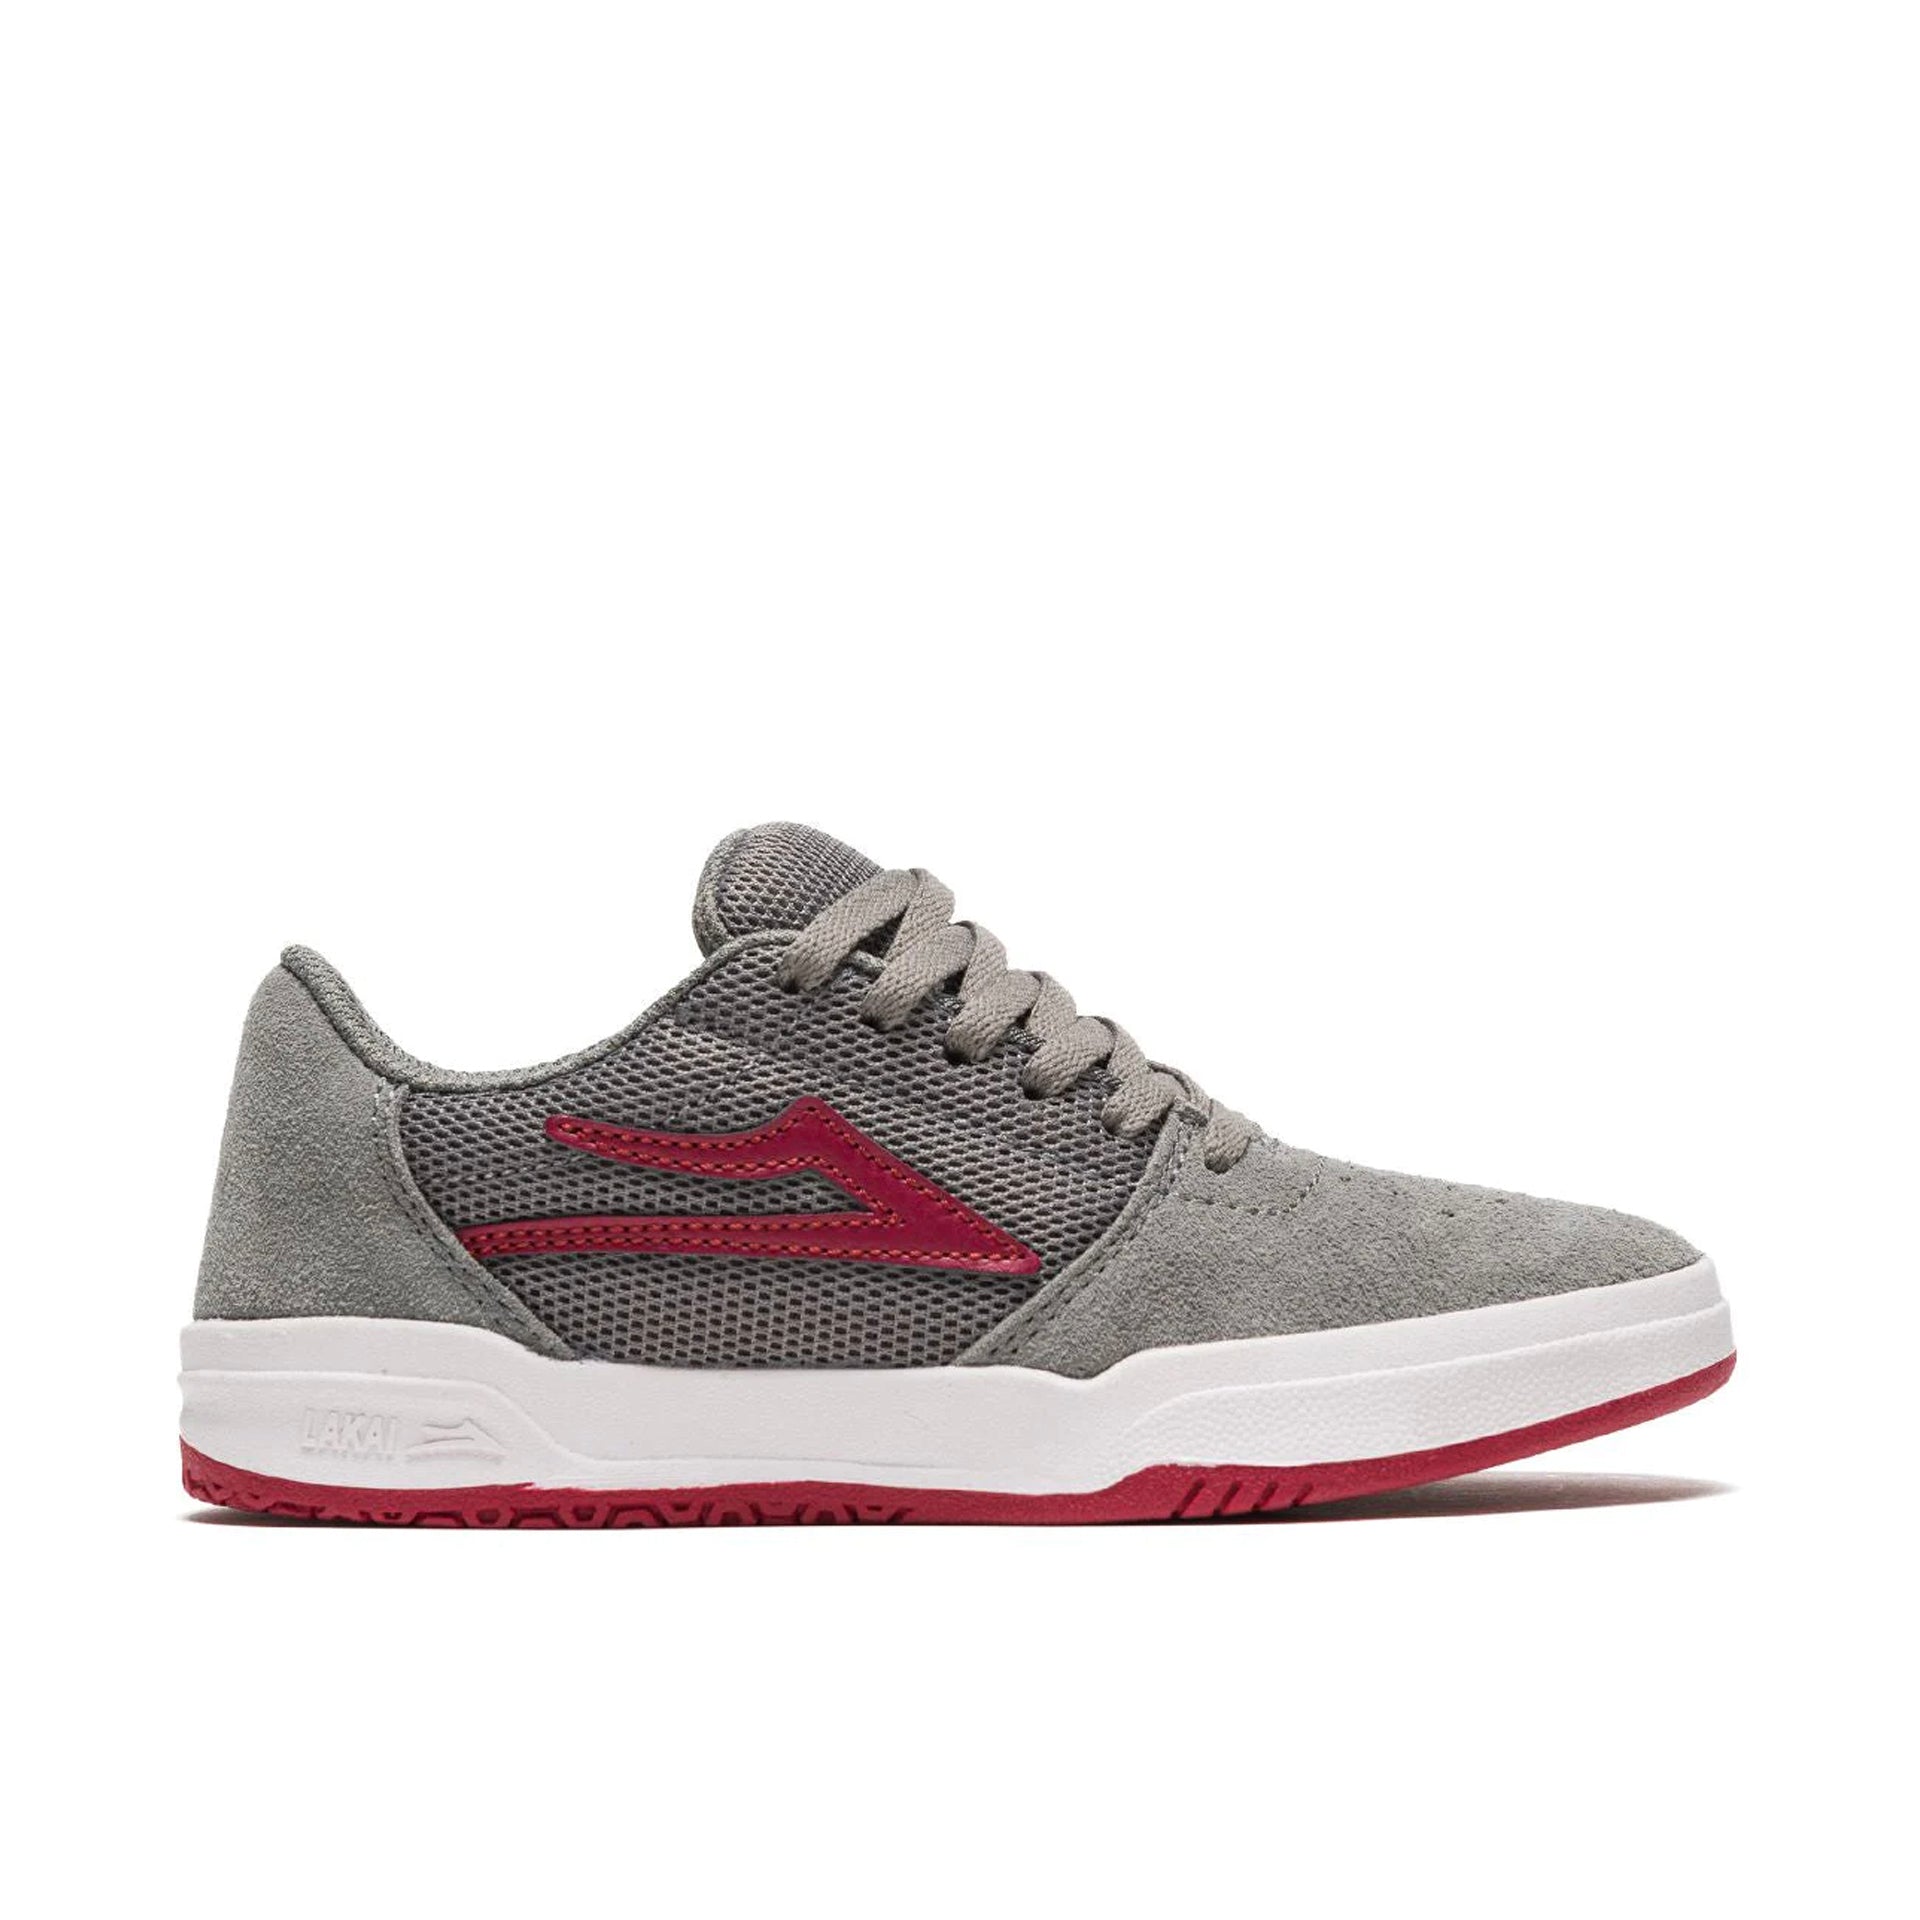 Lakai Brighton Kids Shoes - Grey/ Red Suede - Prime Delux Store